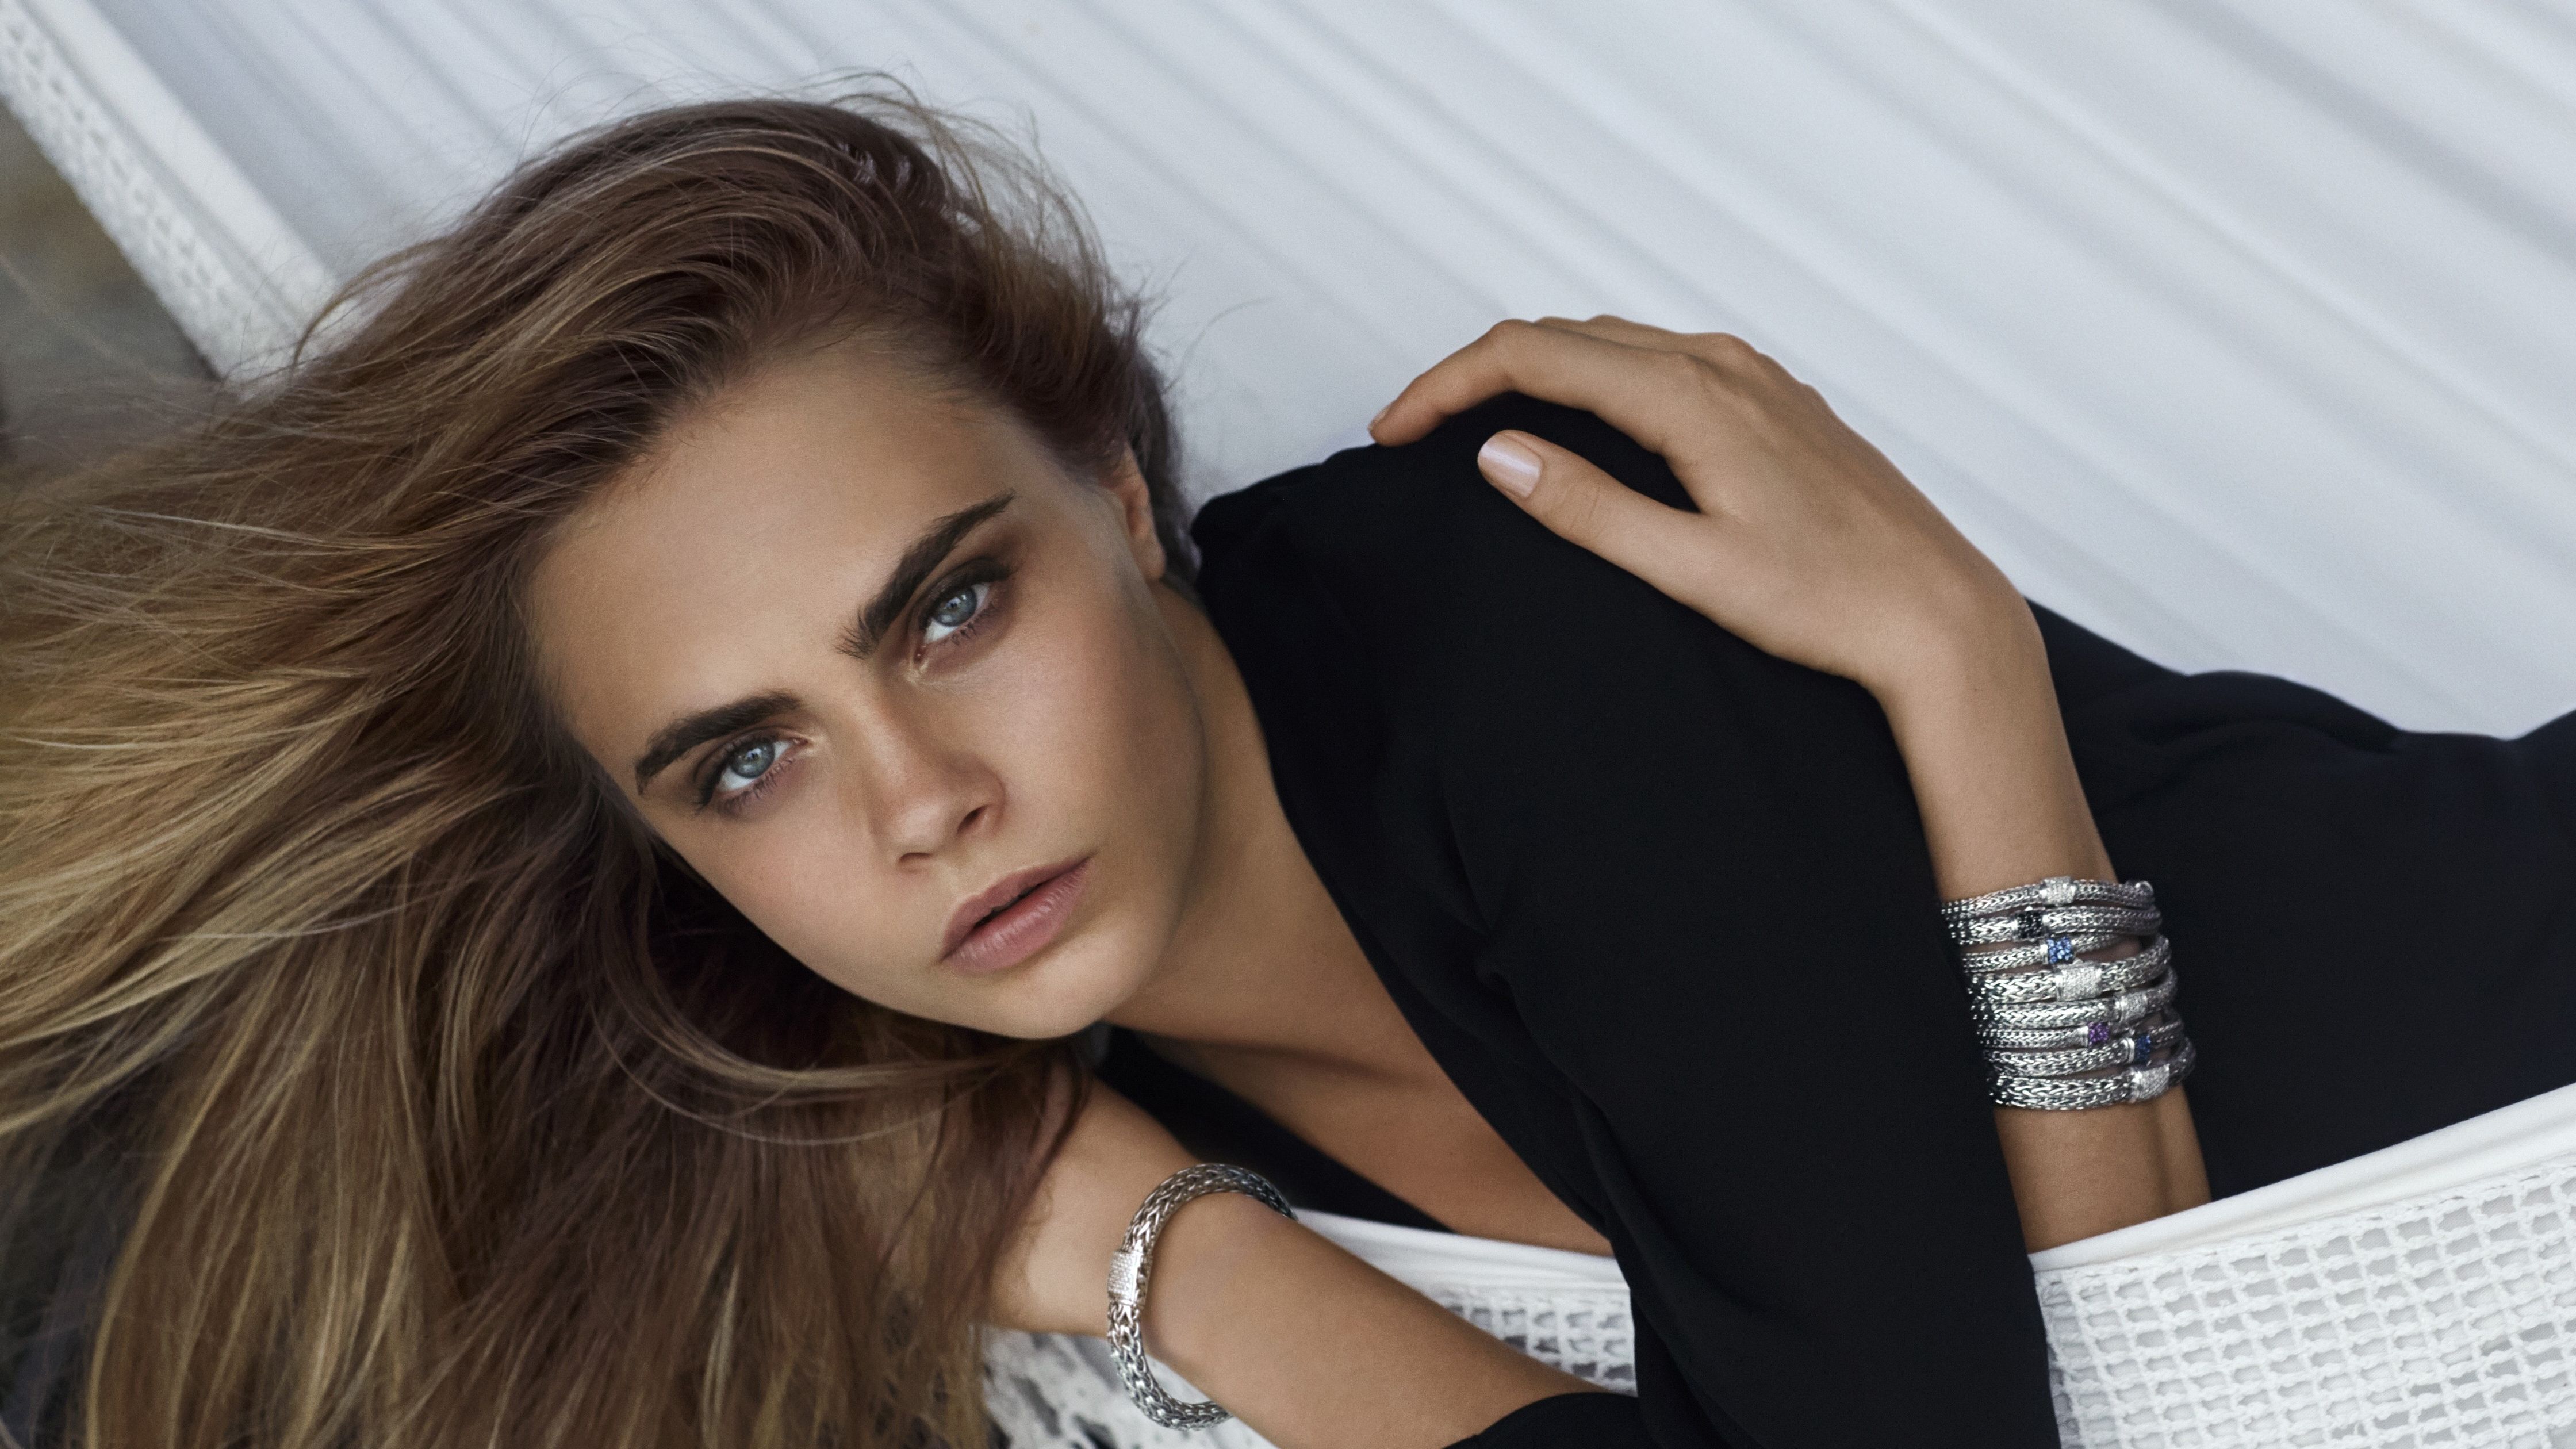 Cara Delevingne 2019 4k, HD Celebrities, 4k Wallpaper, Image, Background, Photo and Picture